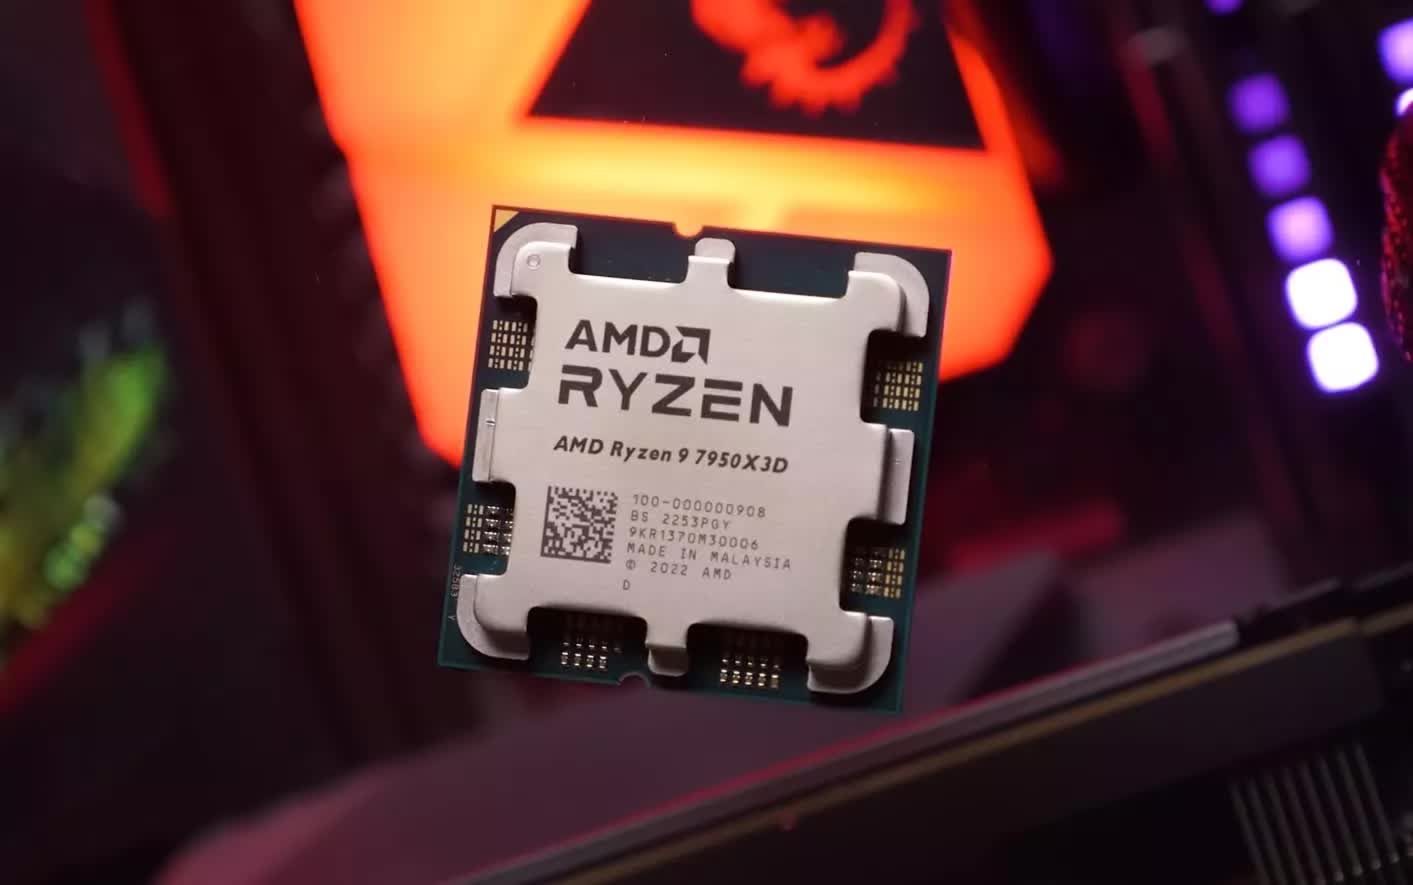 AMD is working to reduce heat generated by high-density CPU chiplets